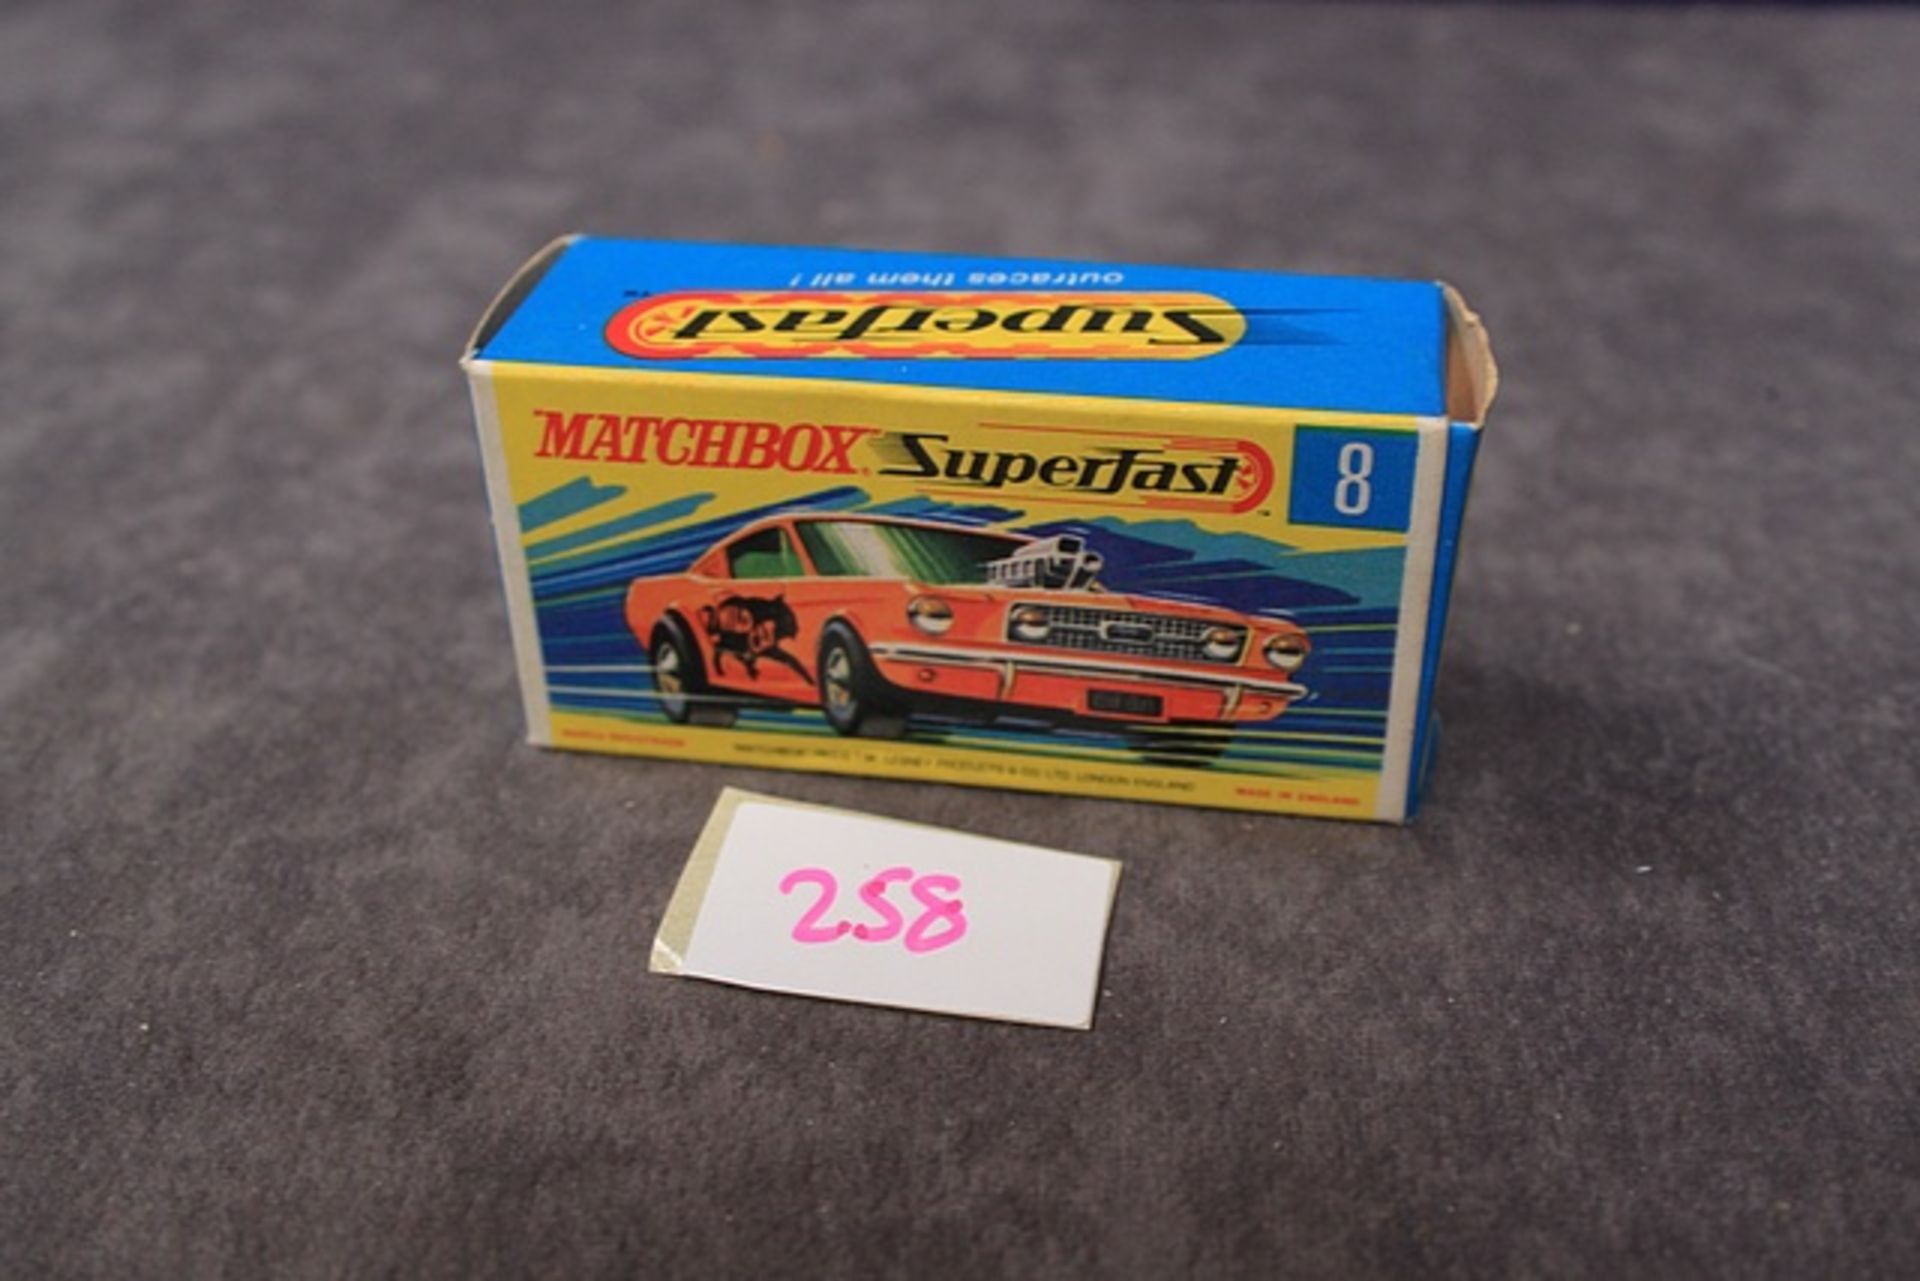 Mint Matchbox Superfast Diecast # 8 Wild Cat Dragster Pink With Rare Yellow Base In Crisp Box - Image 3 of 3